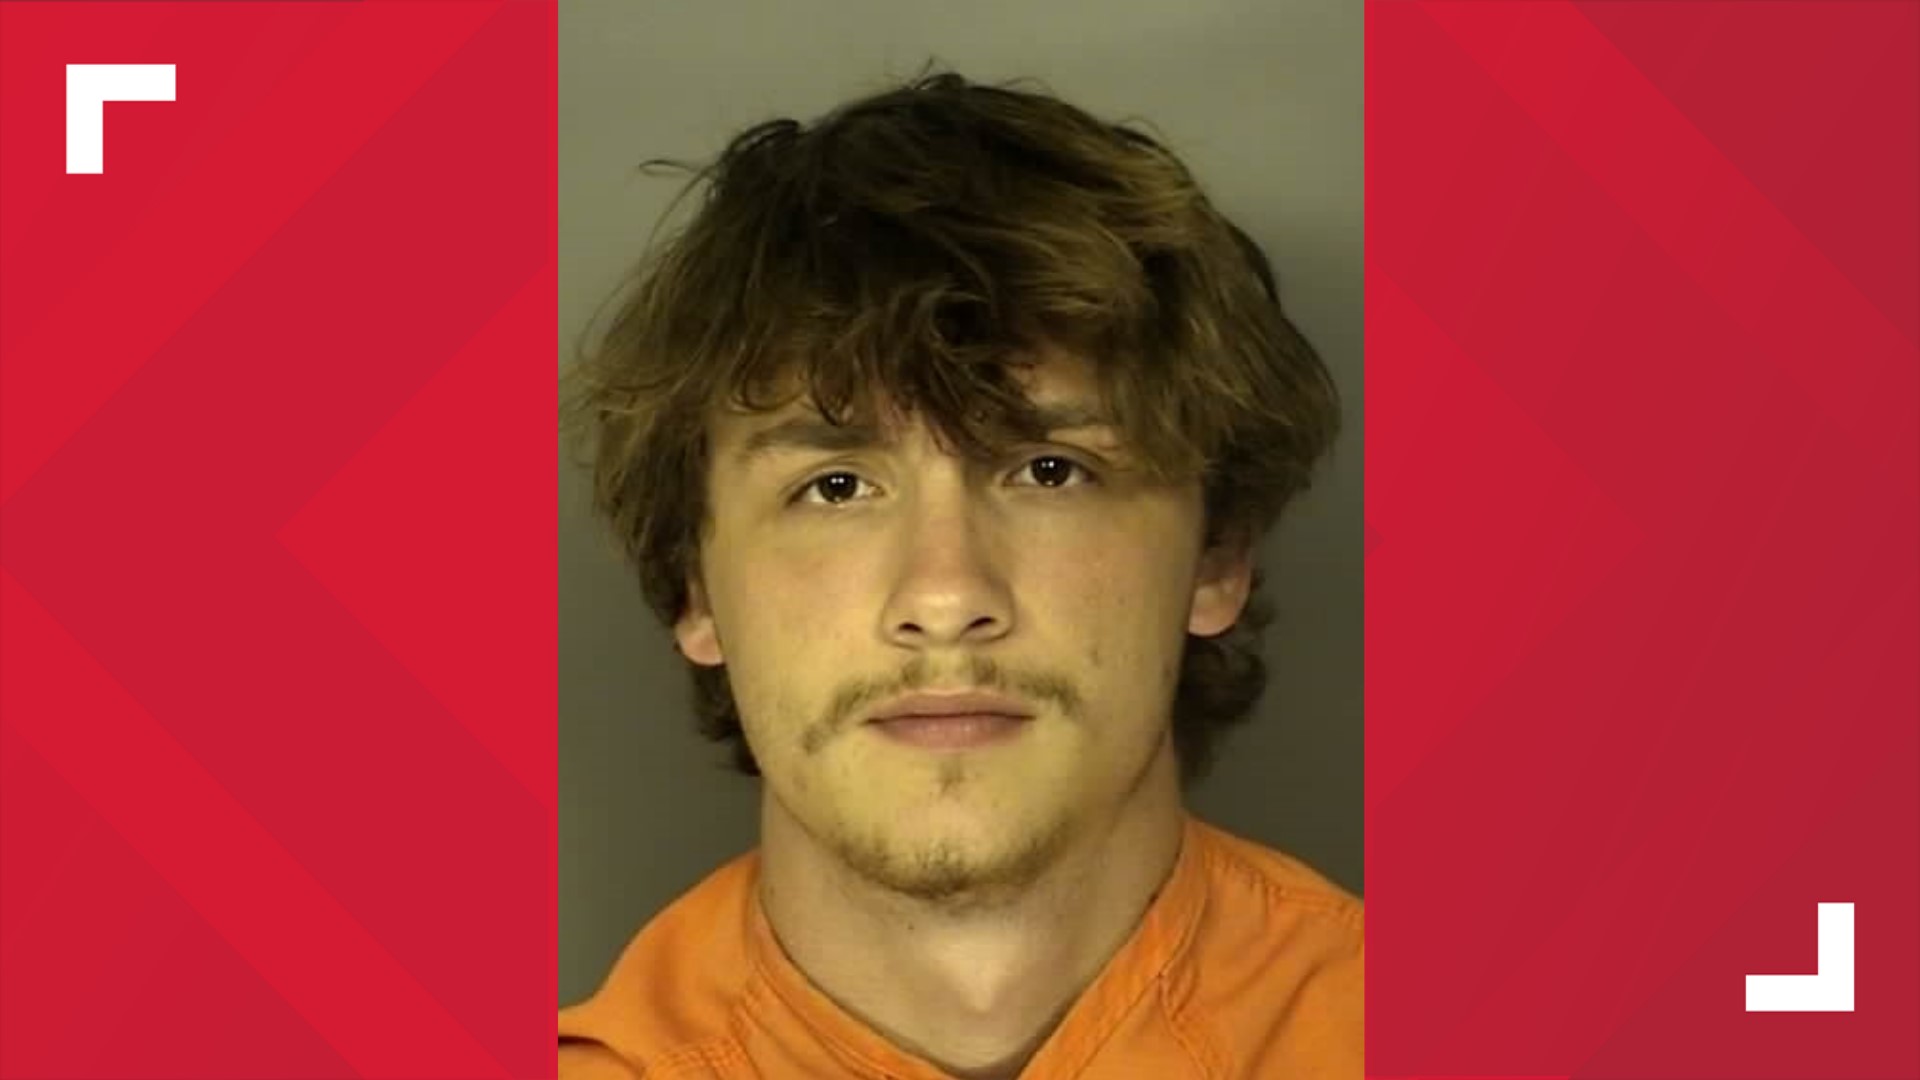 Blake Linkous, 18, of Blue Rock, Ohio, was arrested on Thursday and charged with the murder of Natalie Martin, according to Horry County Jail records.